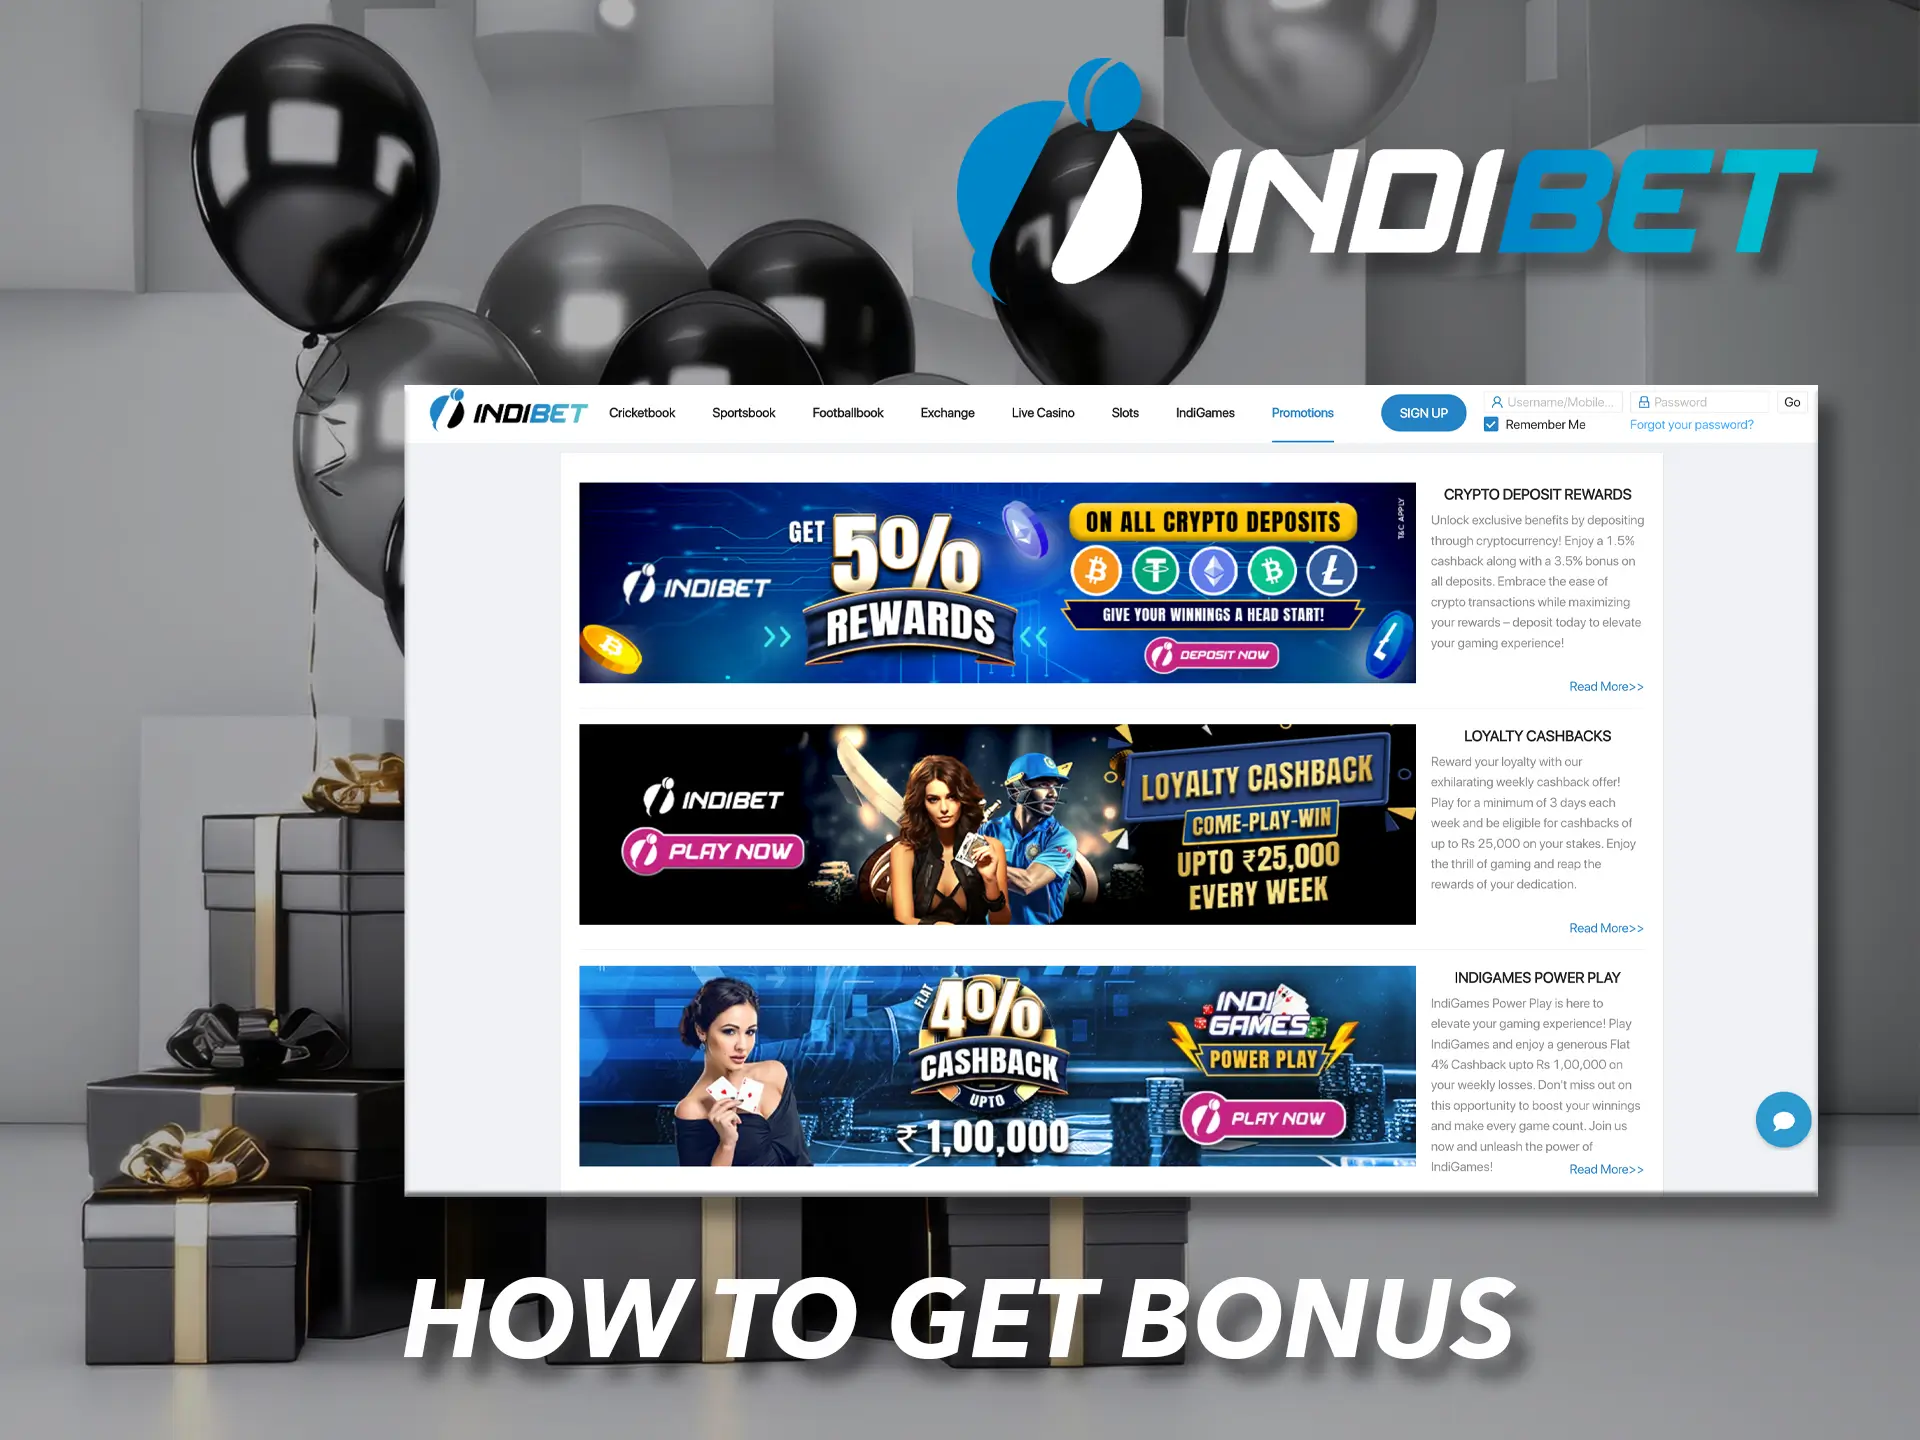 After your first deposit at Indibet, you can get your first long-awaited bonus.